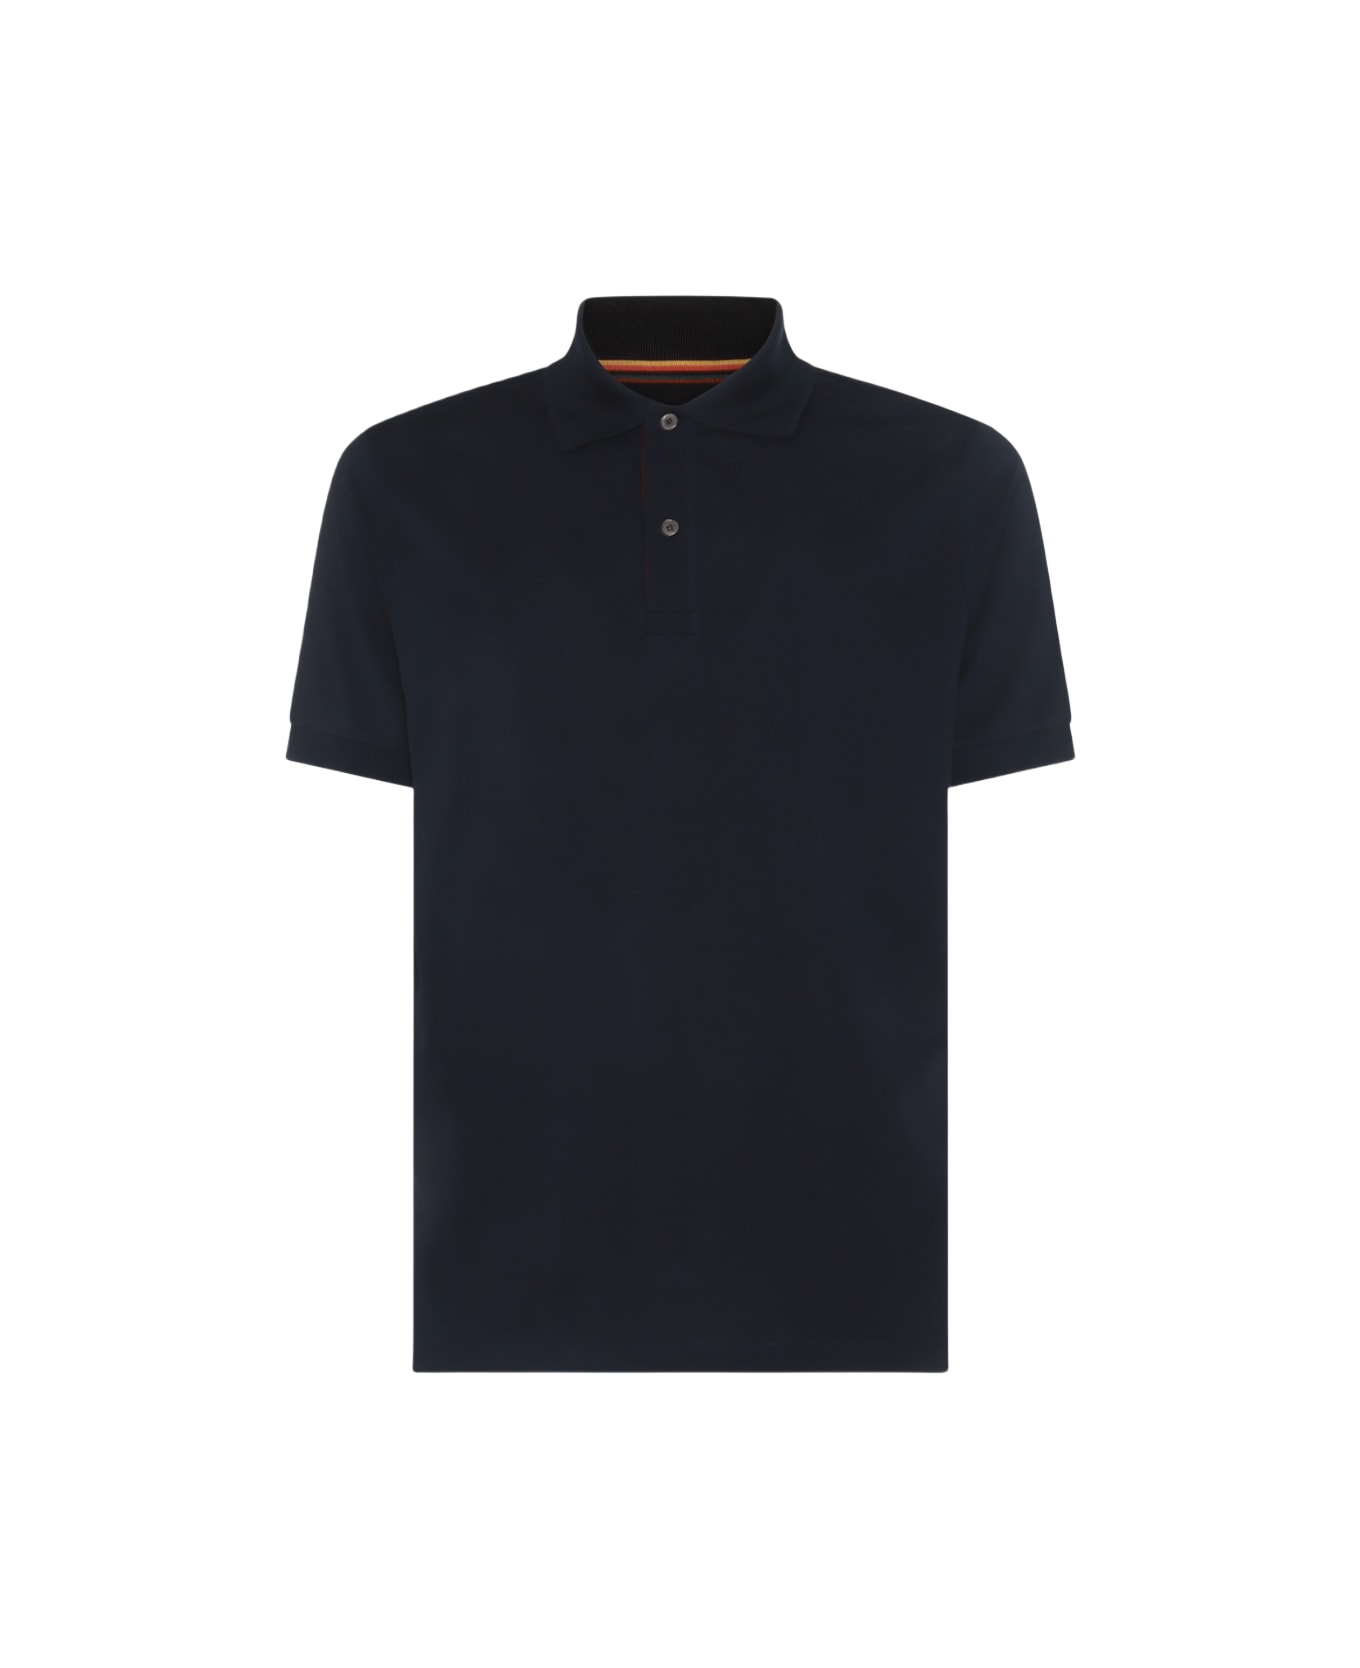 Paul Smith Navy Blue Cotton Polo Shirt - Blue ポロシャツ